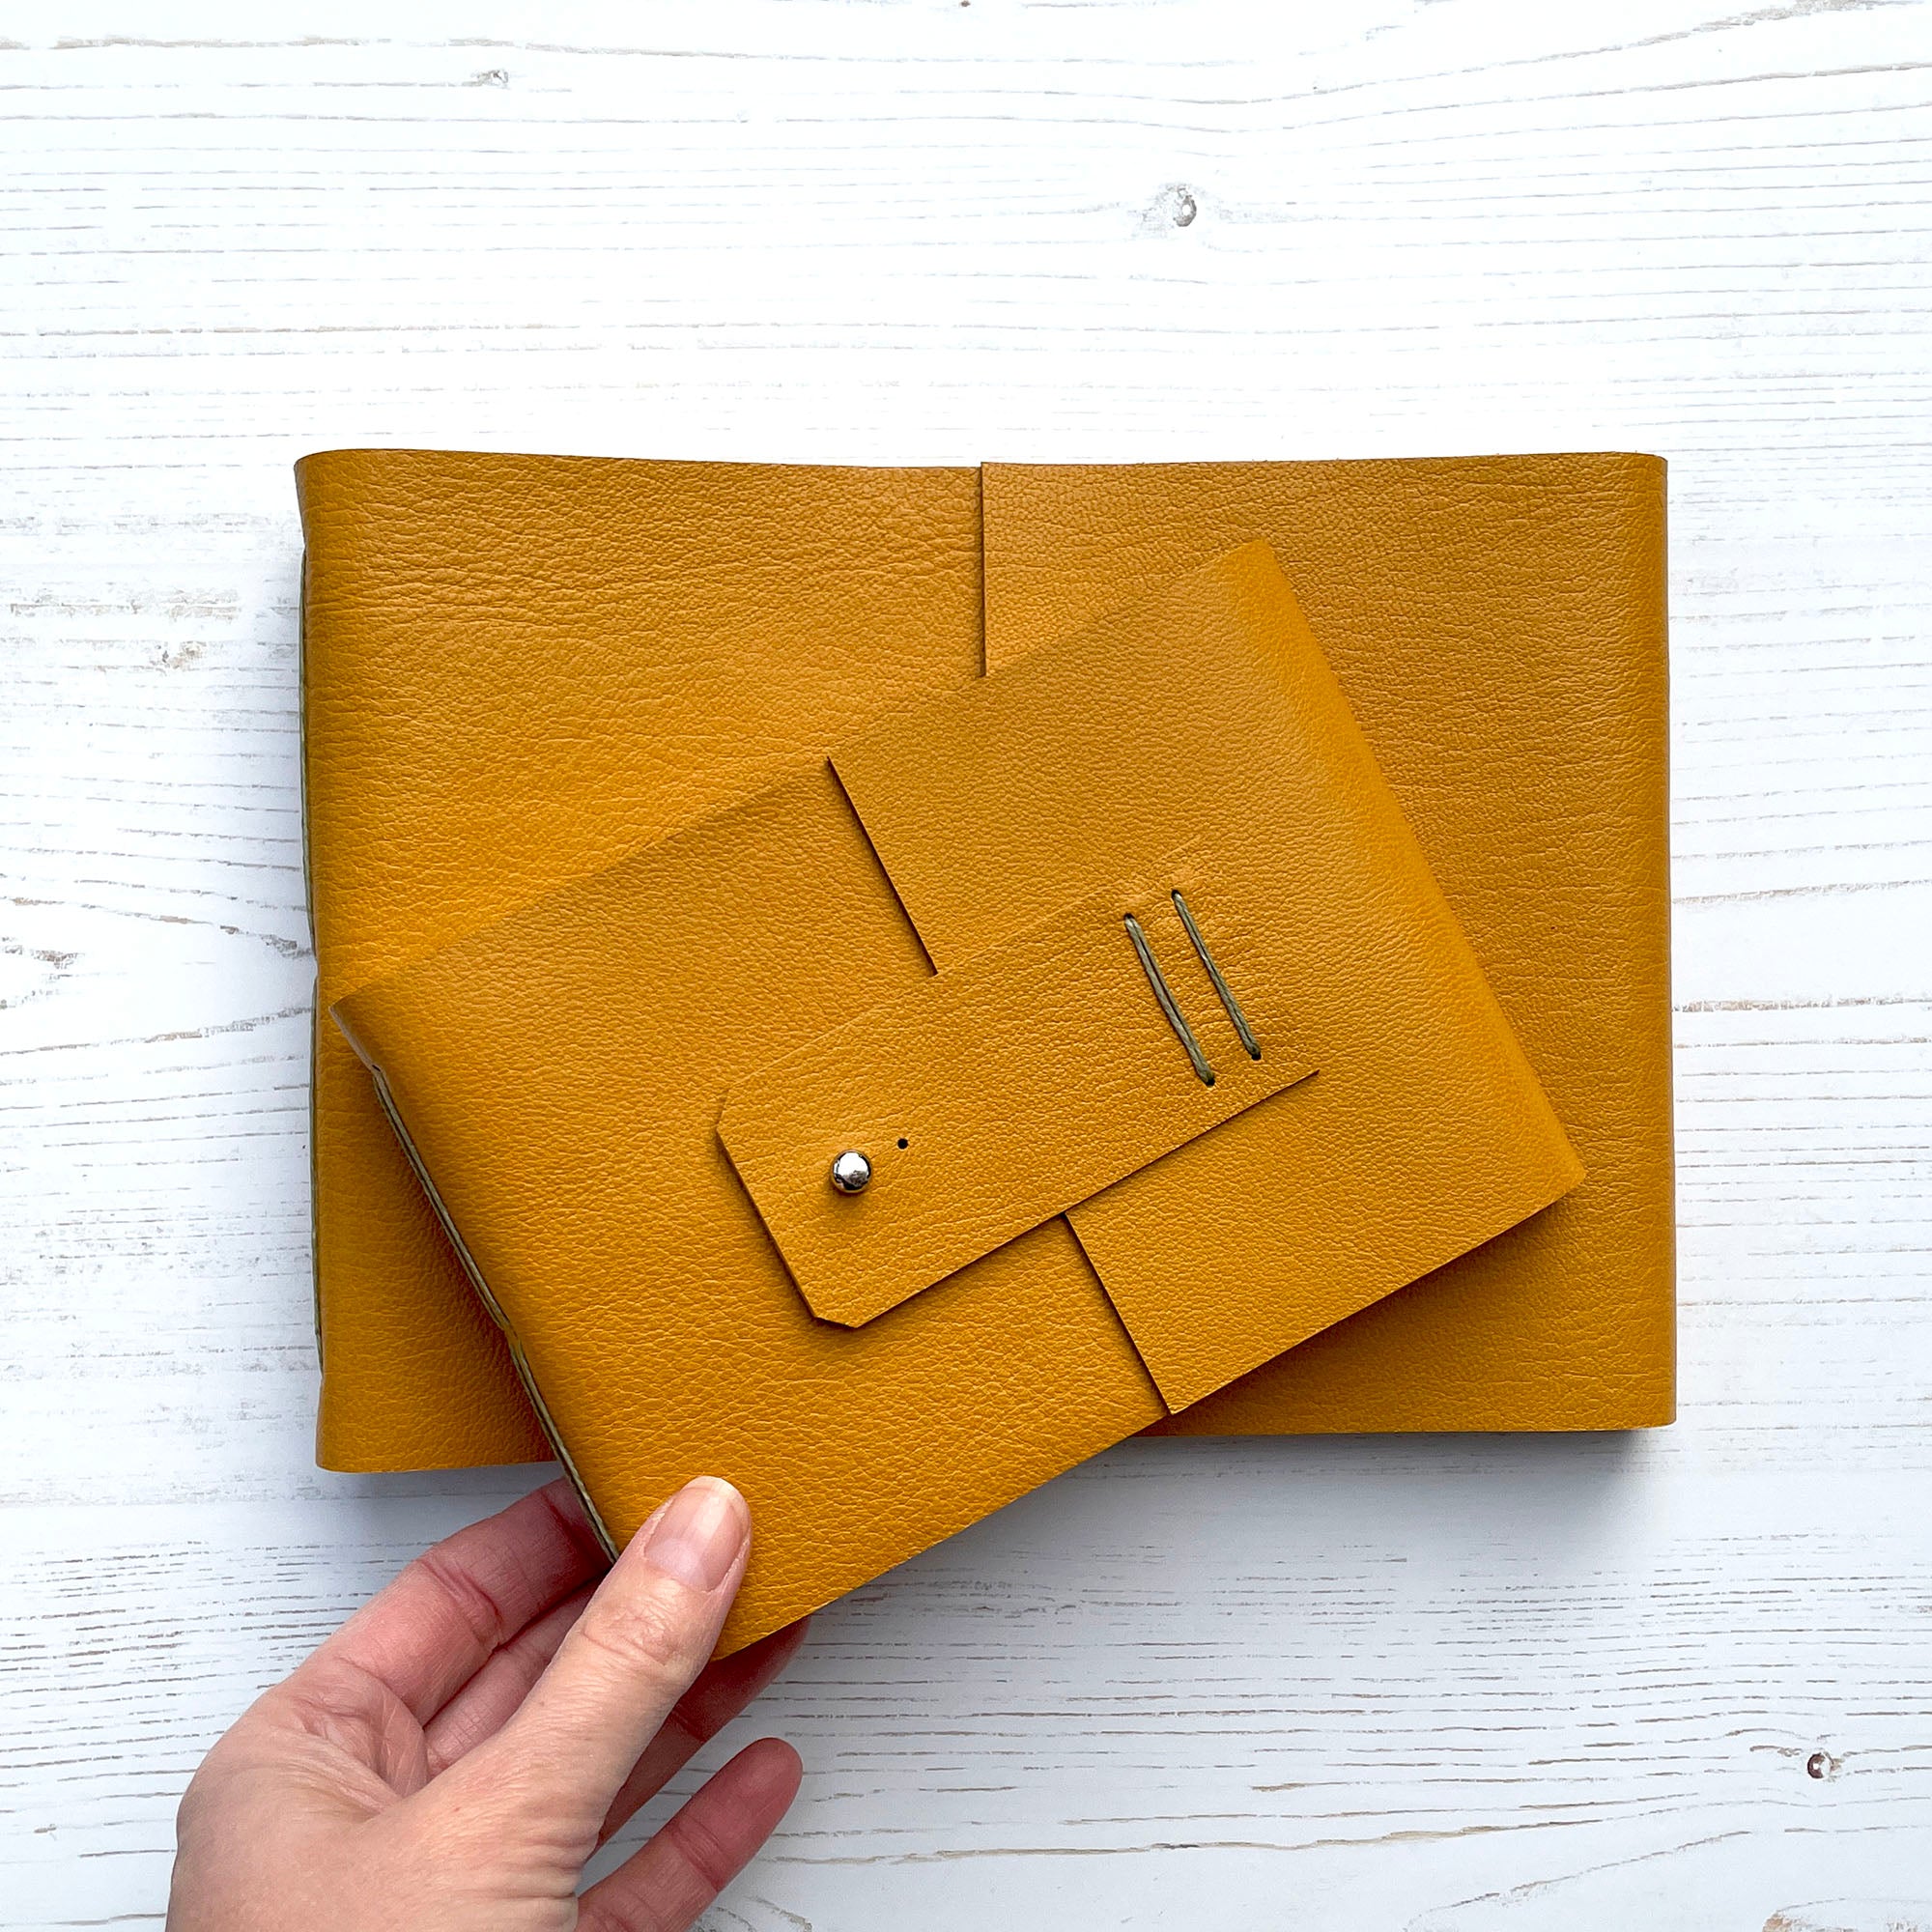 Watercolour Sketchbook bound in Mustard Yellow leather and Olive stitching, handmade in the UK